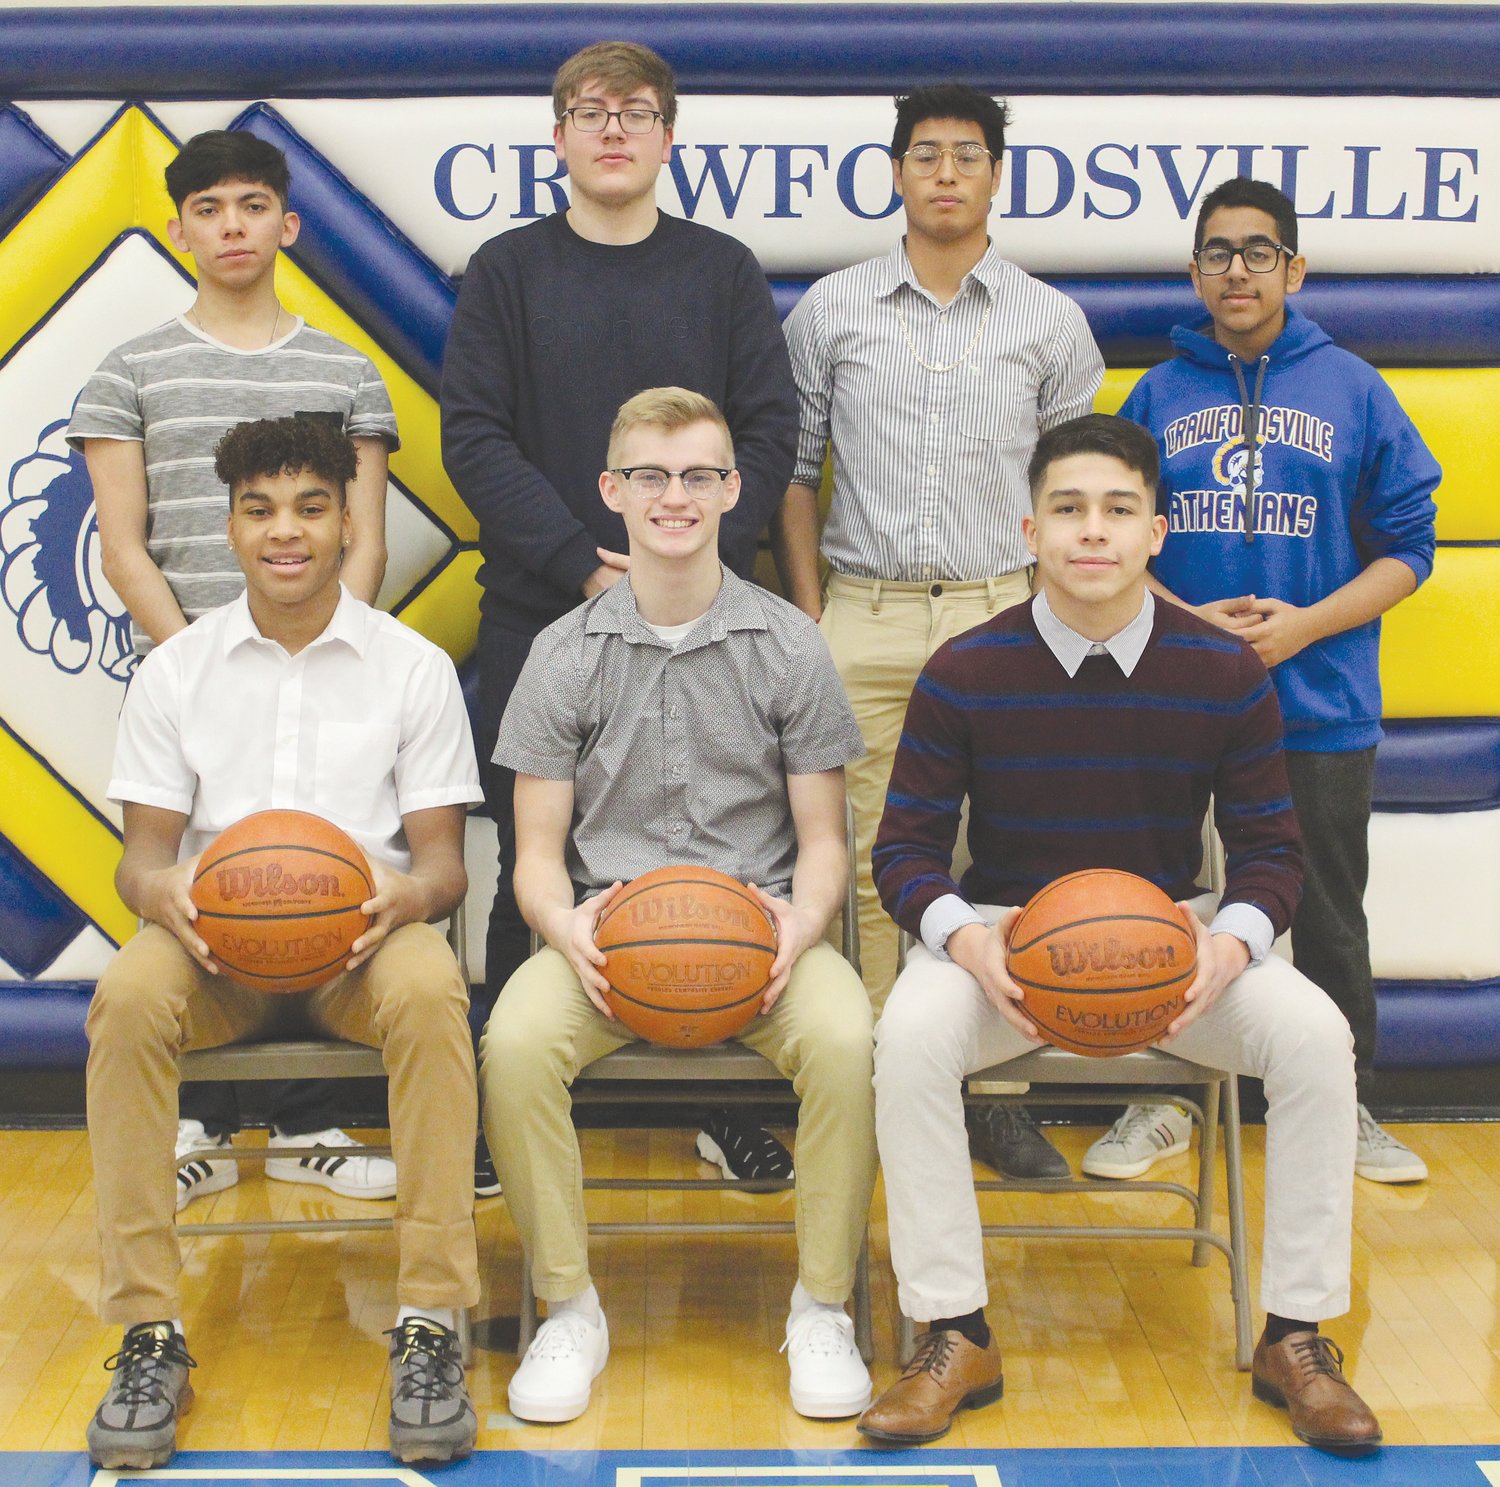 The 2020 Crawfordsville High School Snowcoming King candidates and attendants are pictured, from left, front row, freshman attendant Mikale Willis, junior attendant Andrew Martin, and sophomore attendant Edwin Gil Herrera; and back row, senior king candidates, Jesus Trevi